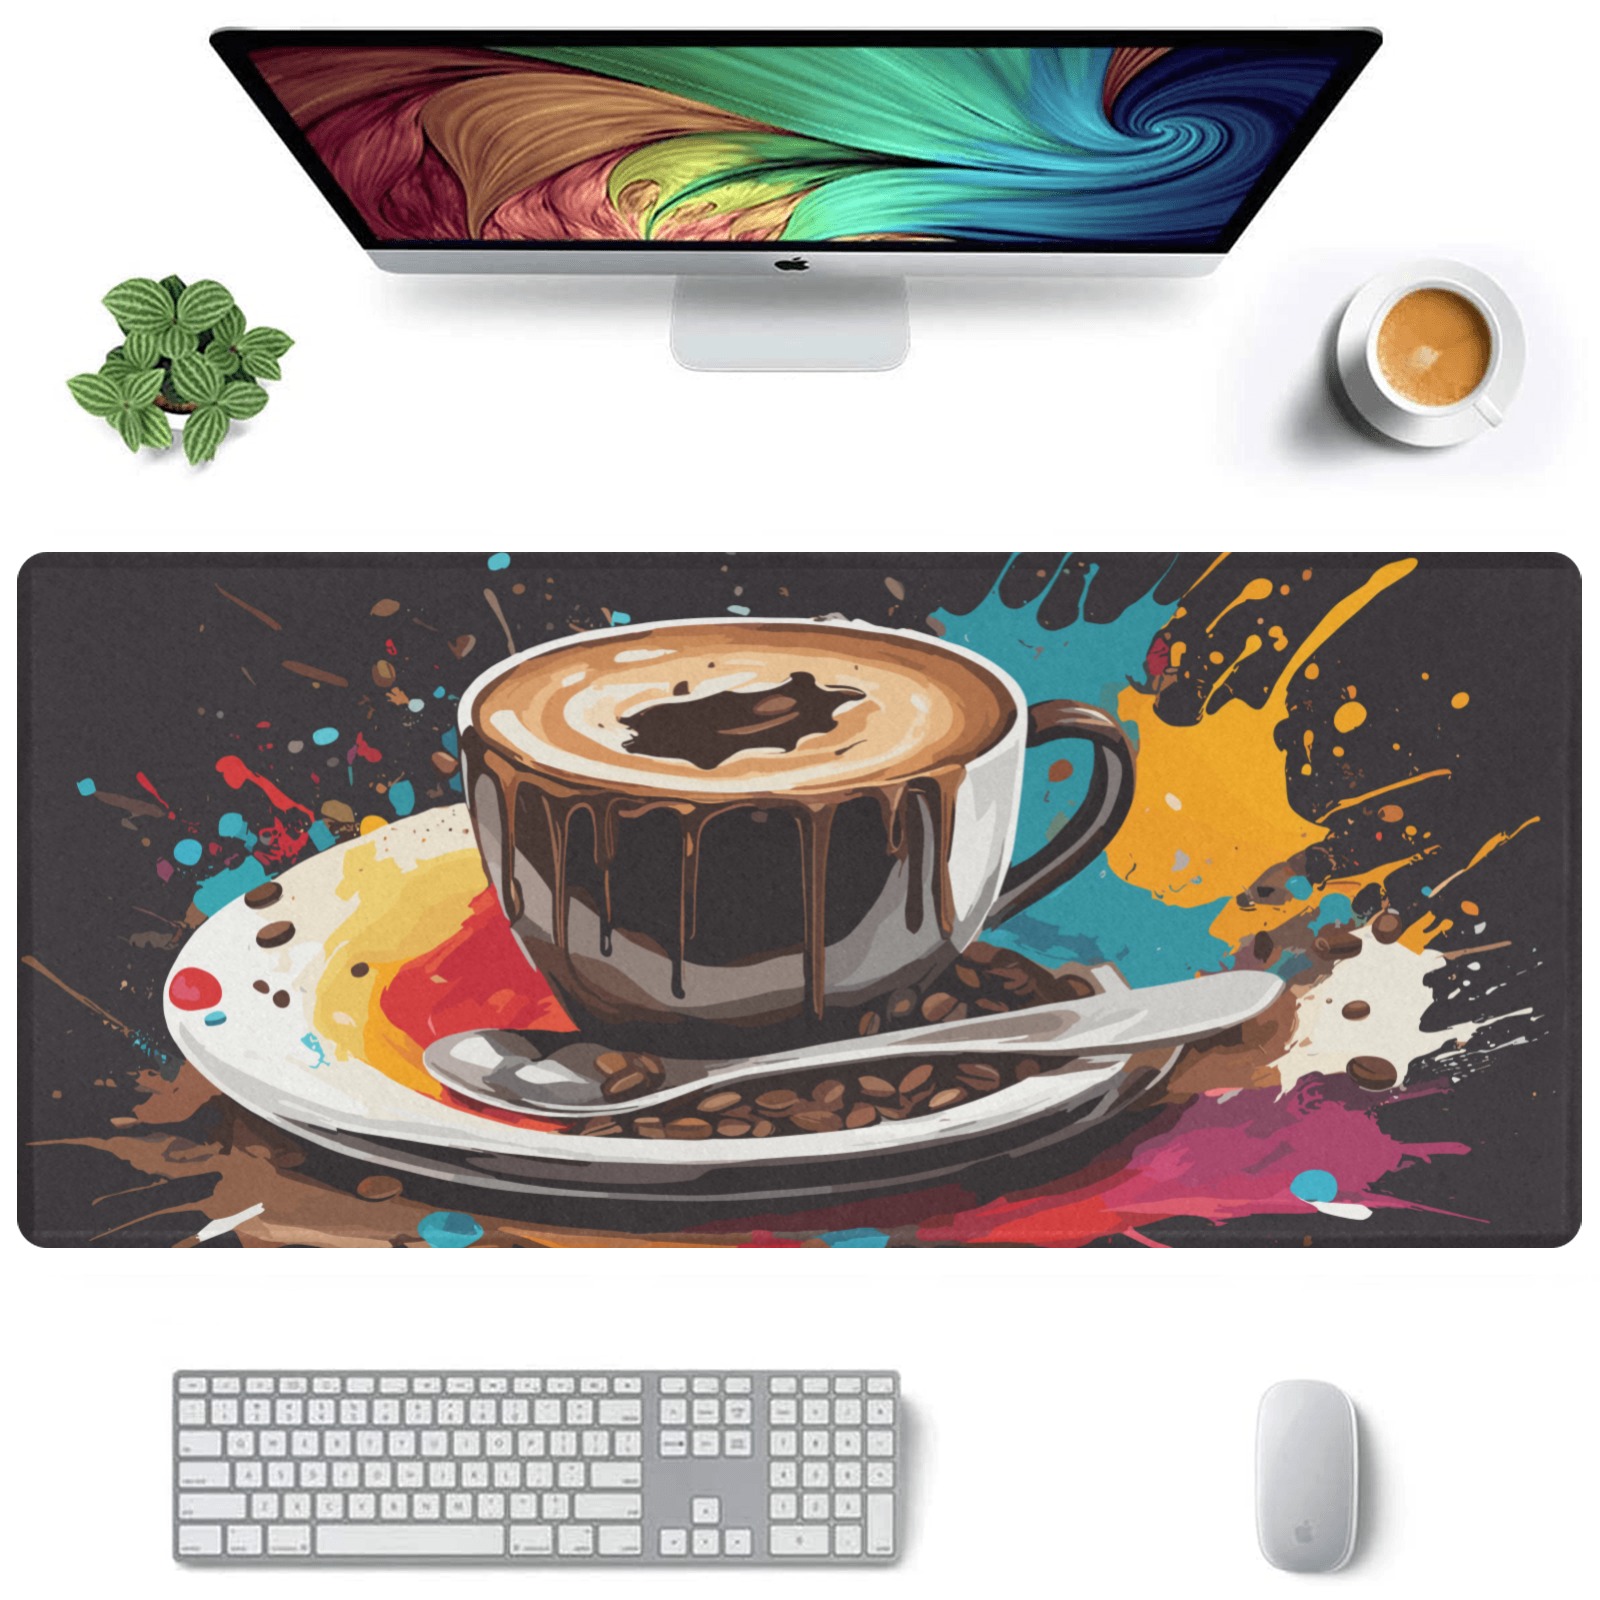 A cup of hot chocolate and colors around it art Gaming Mousepad (35"x16")